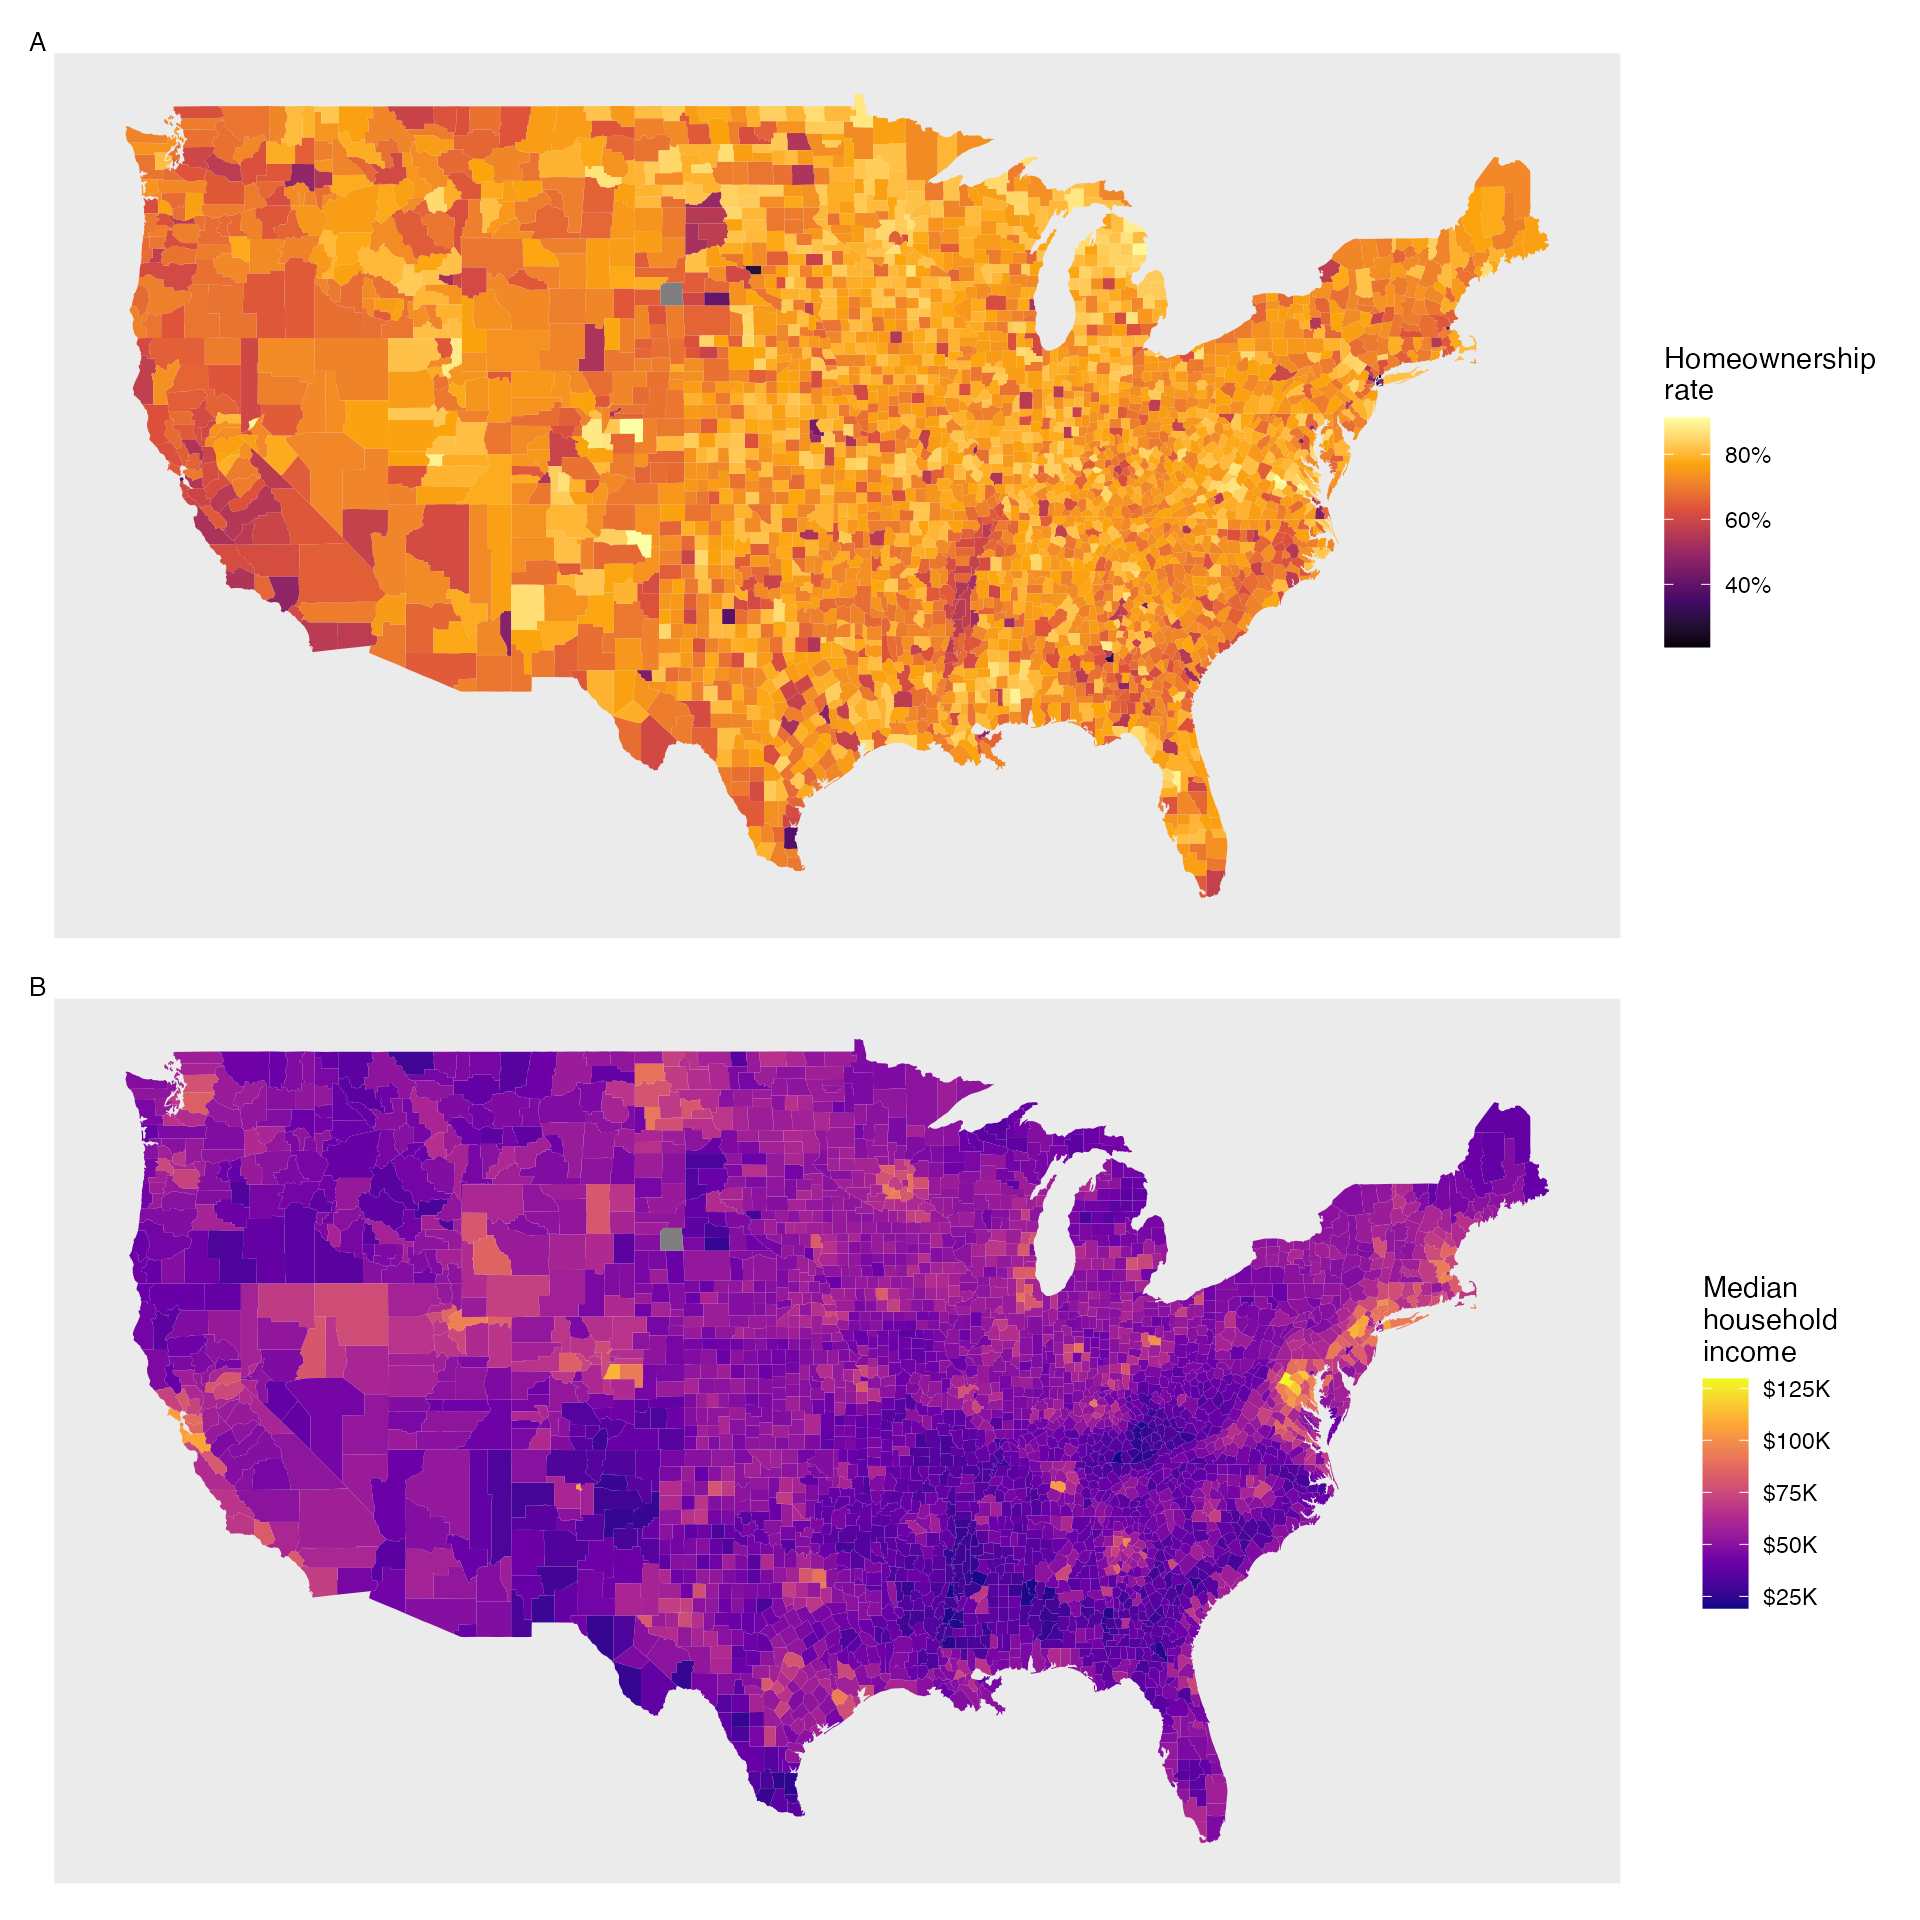 Plot A: Intensity map of homeownership rate (percent). Plot B: Intensity map of median household income ($1000s).